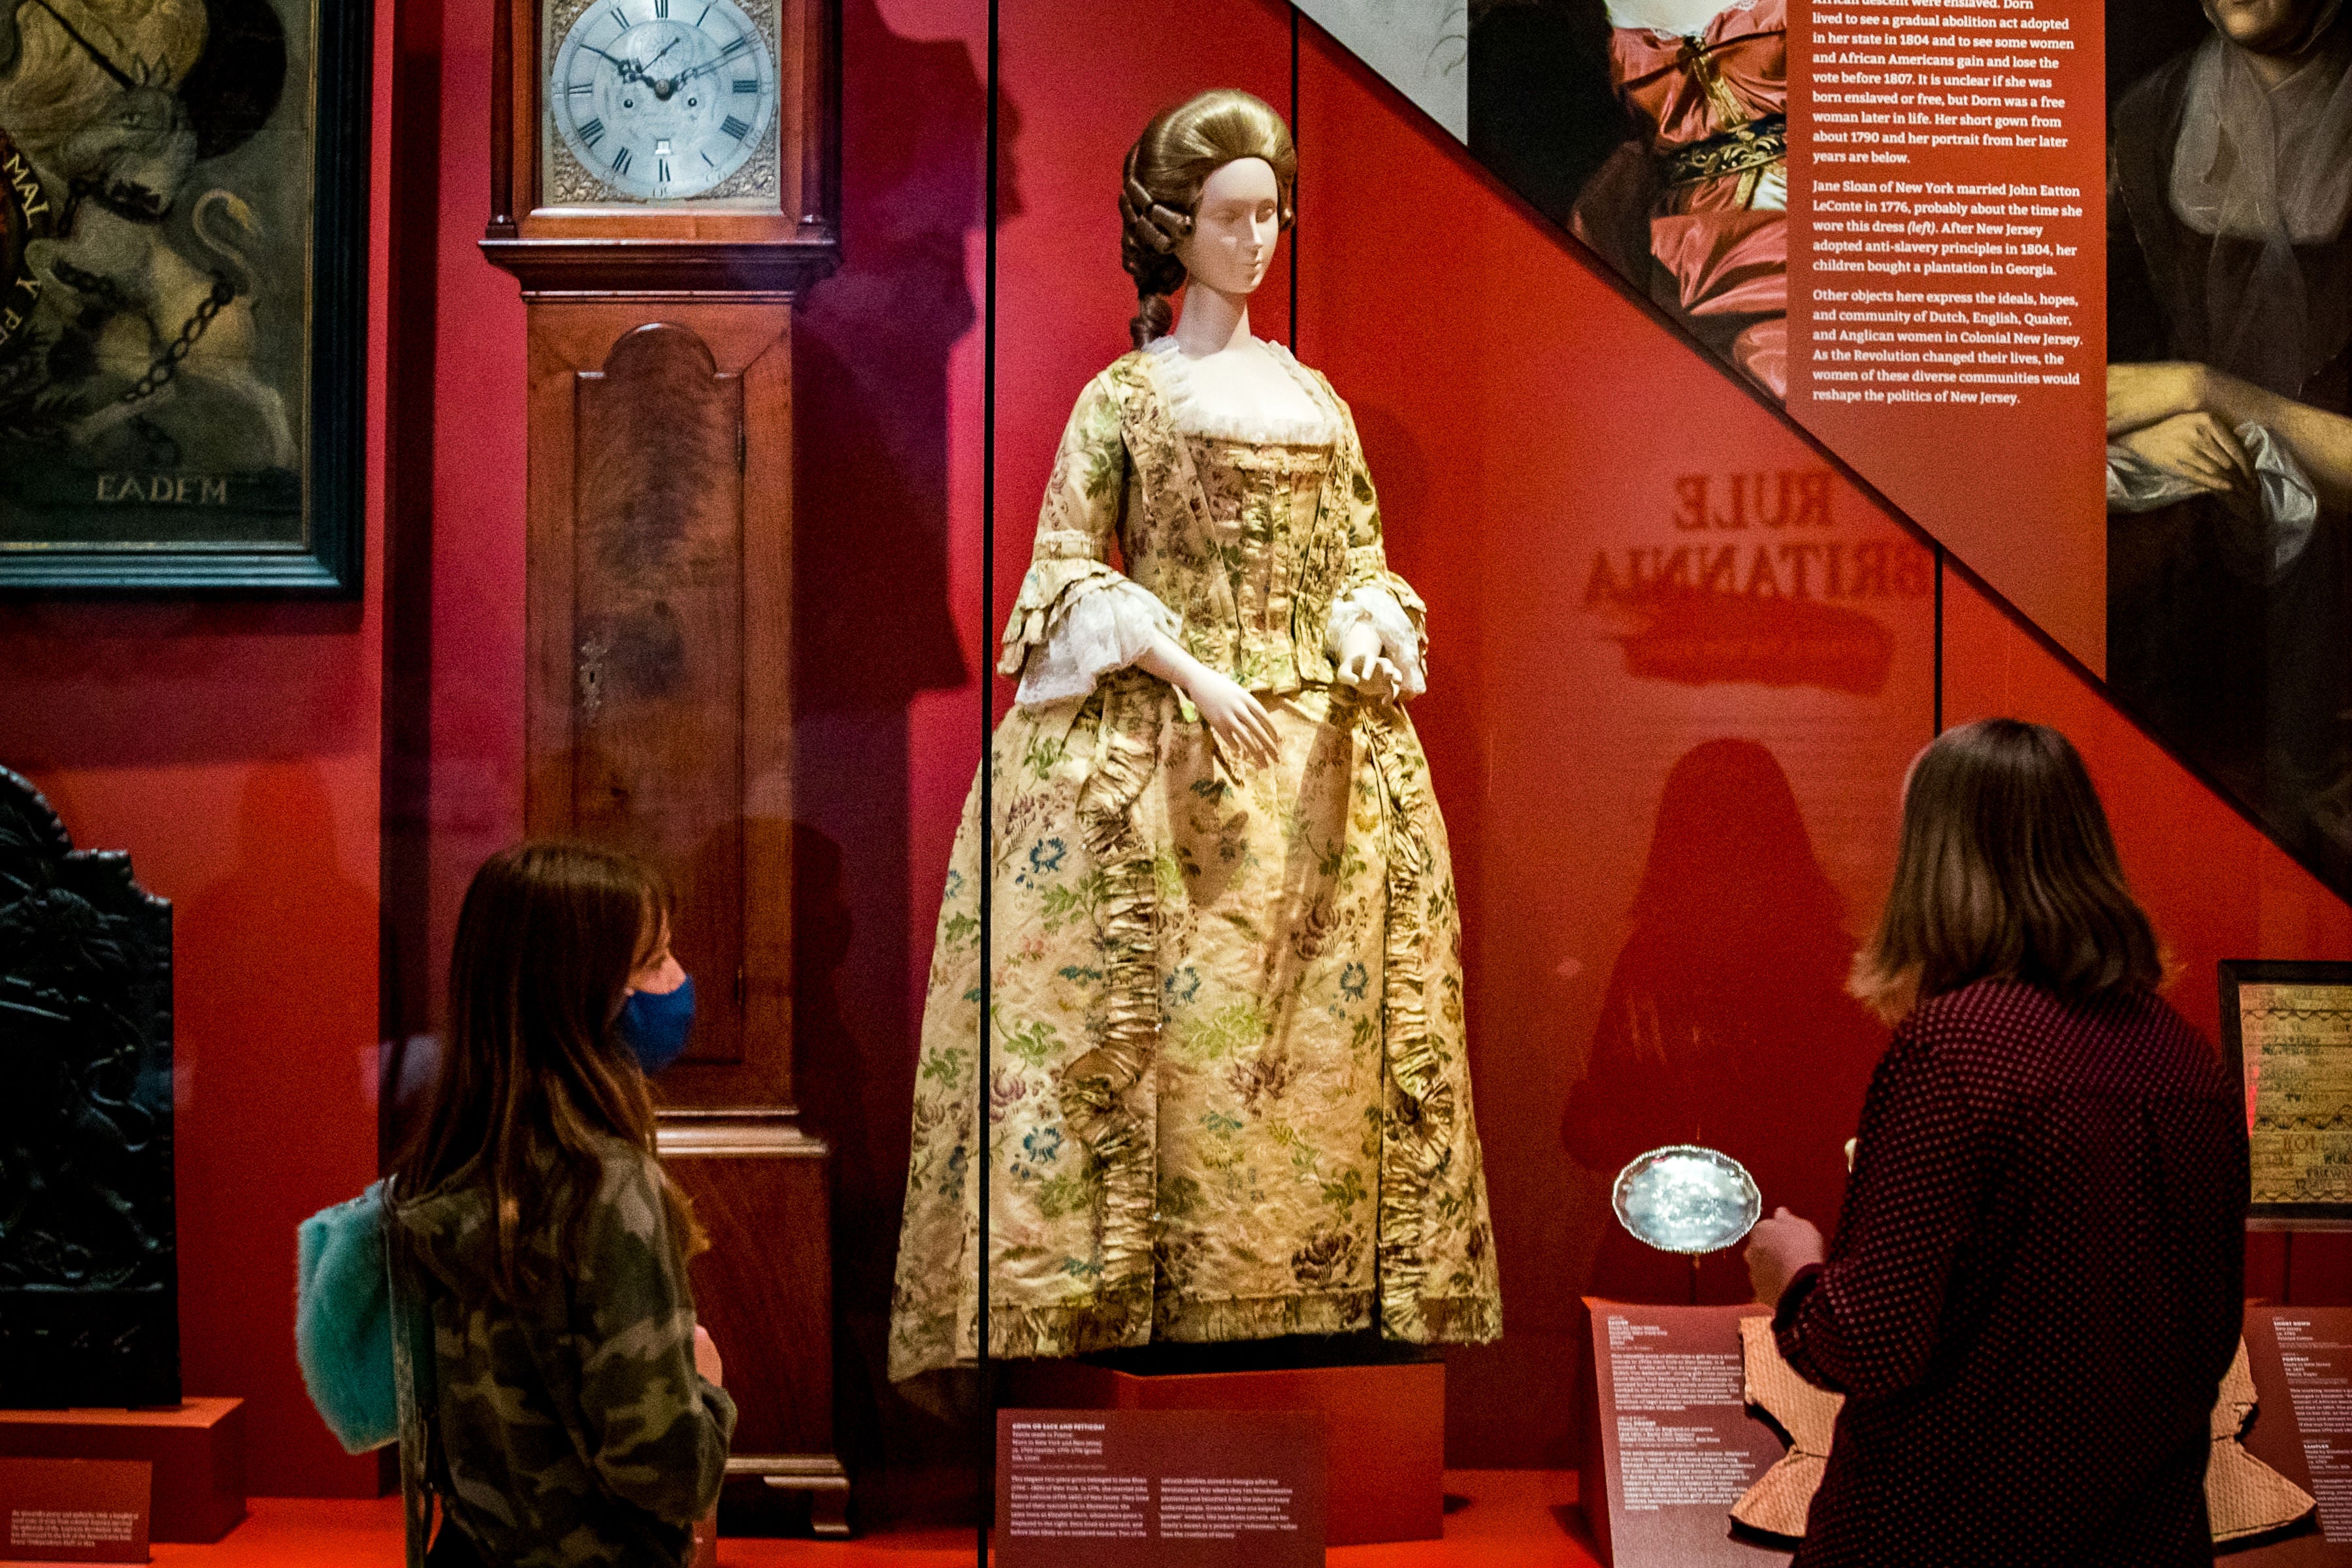 Museum of the American Revolution's "When Women Lost the Vote: A Revolutionary Story, 1776 – 1807"